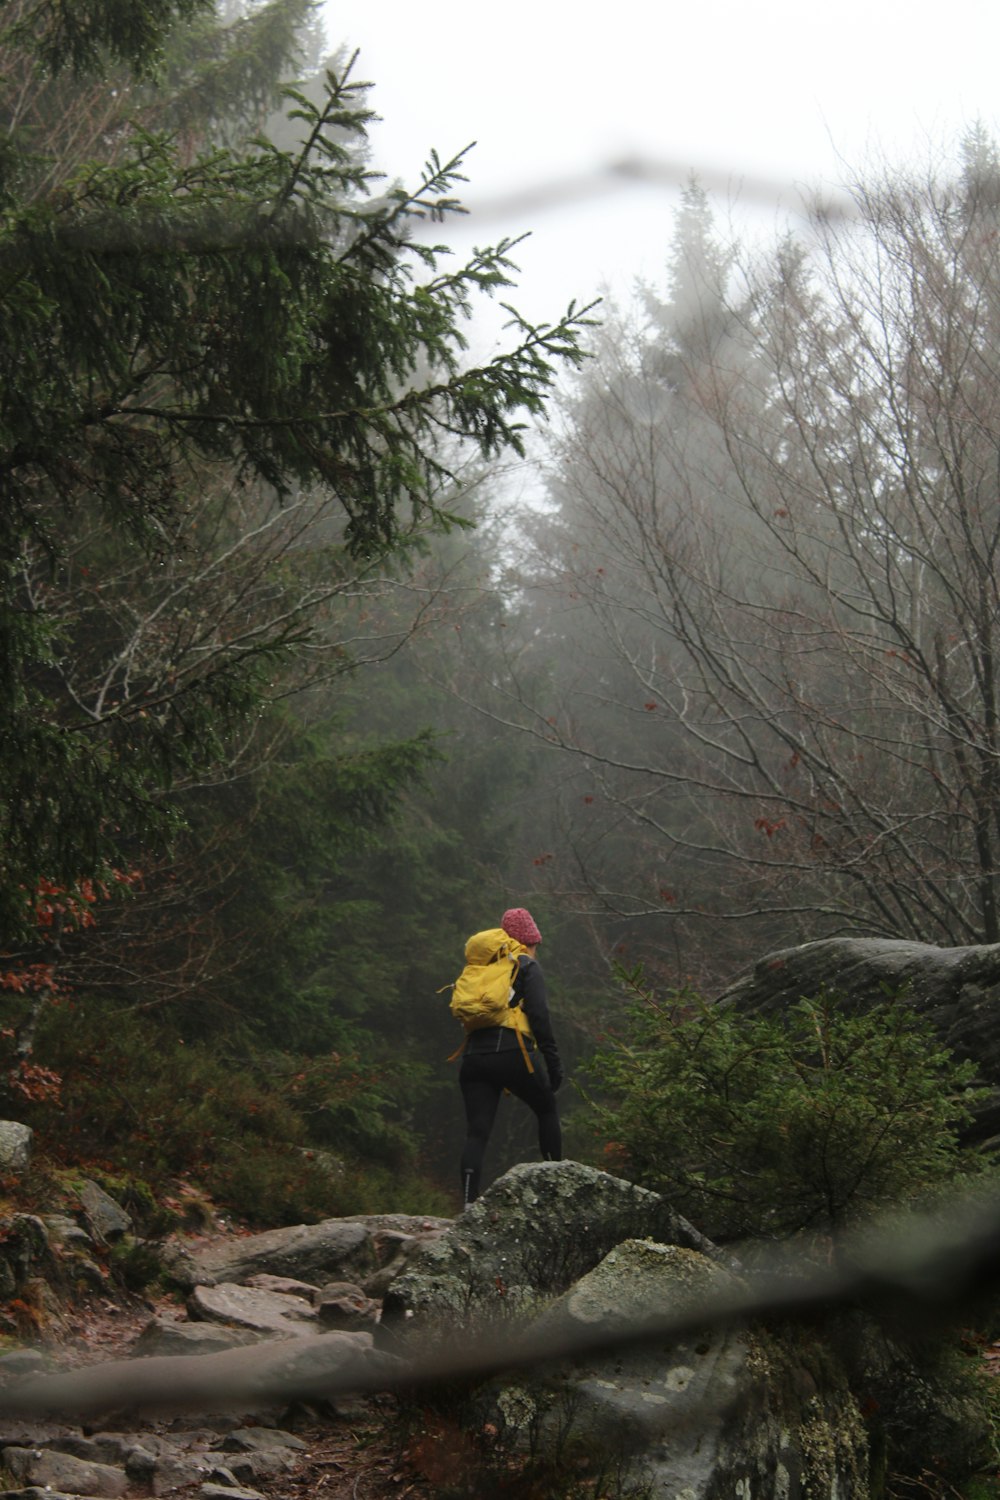 a person with a yellow backpack walking through a forest